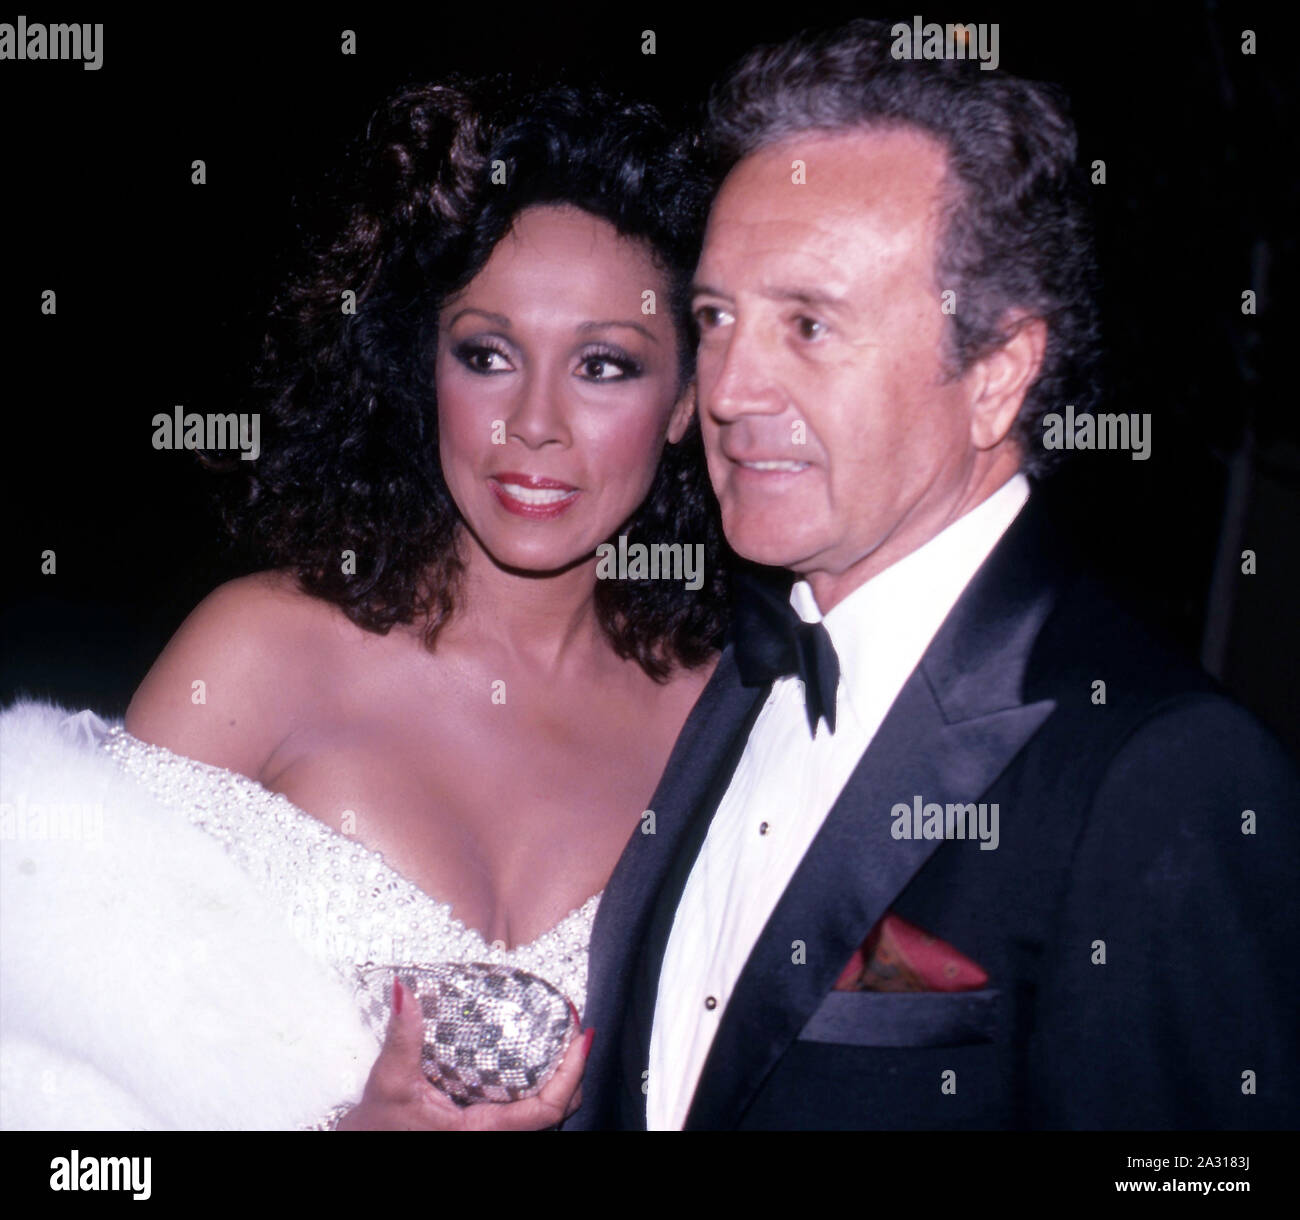 ***FILE PHOTO*** Diahann Carroll Has Passed Away At 84. Diahann Carroll and Vic Damone attend 38th Annual Primetime Emmy Awards on September 21, 1986 at the Pasadena Civic Auditorium in Pasadena, California. Credit: Walter McBride/MediaPunch Stock Photo